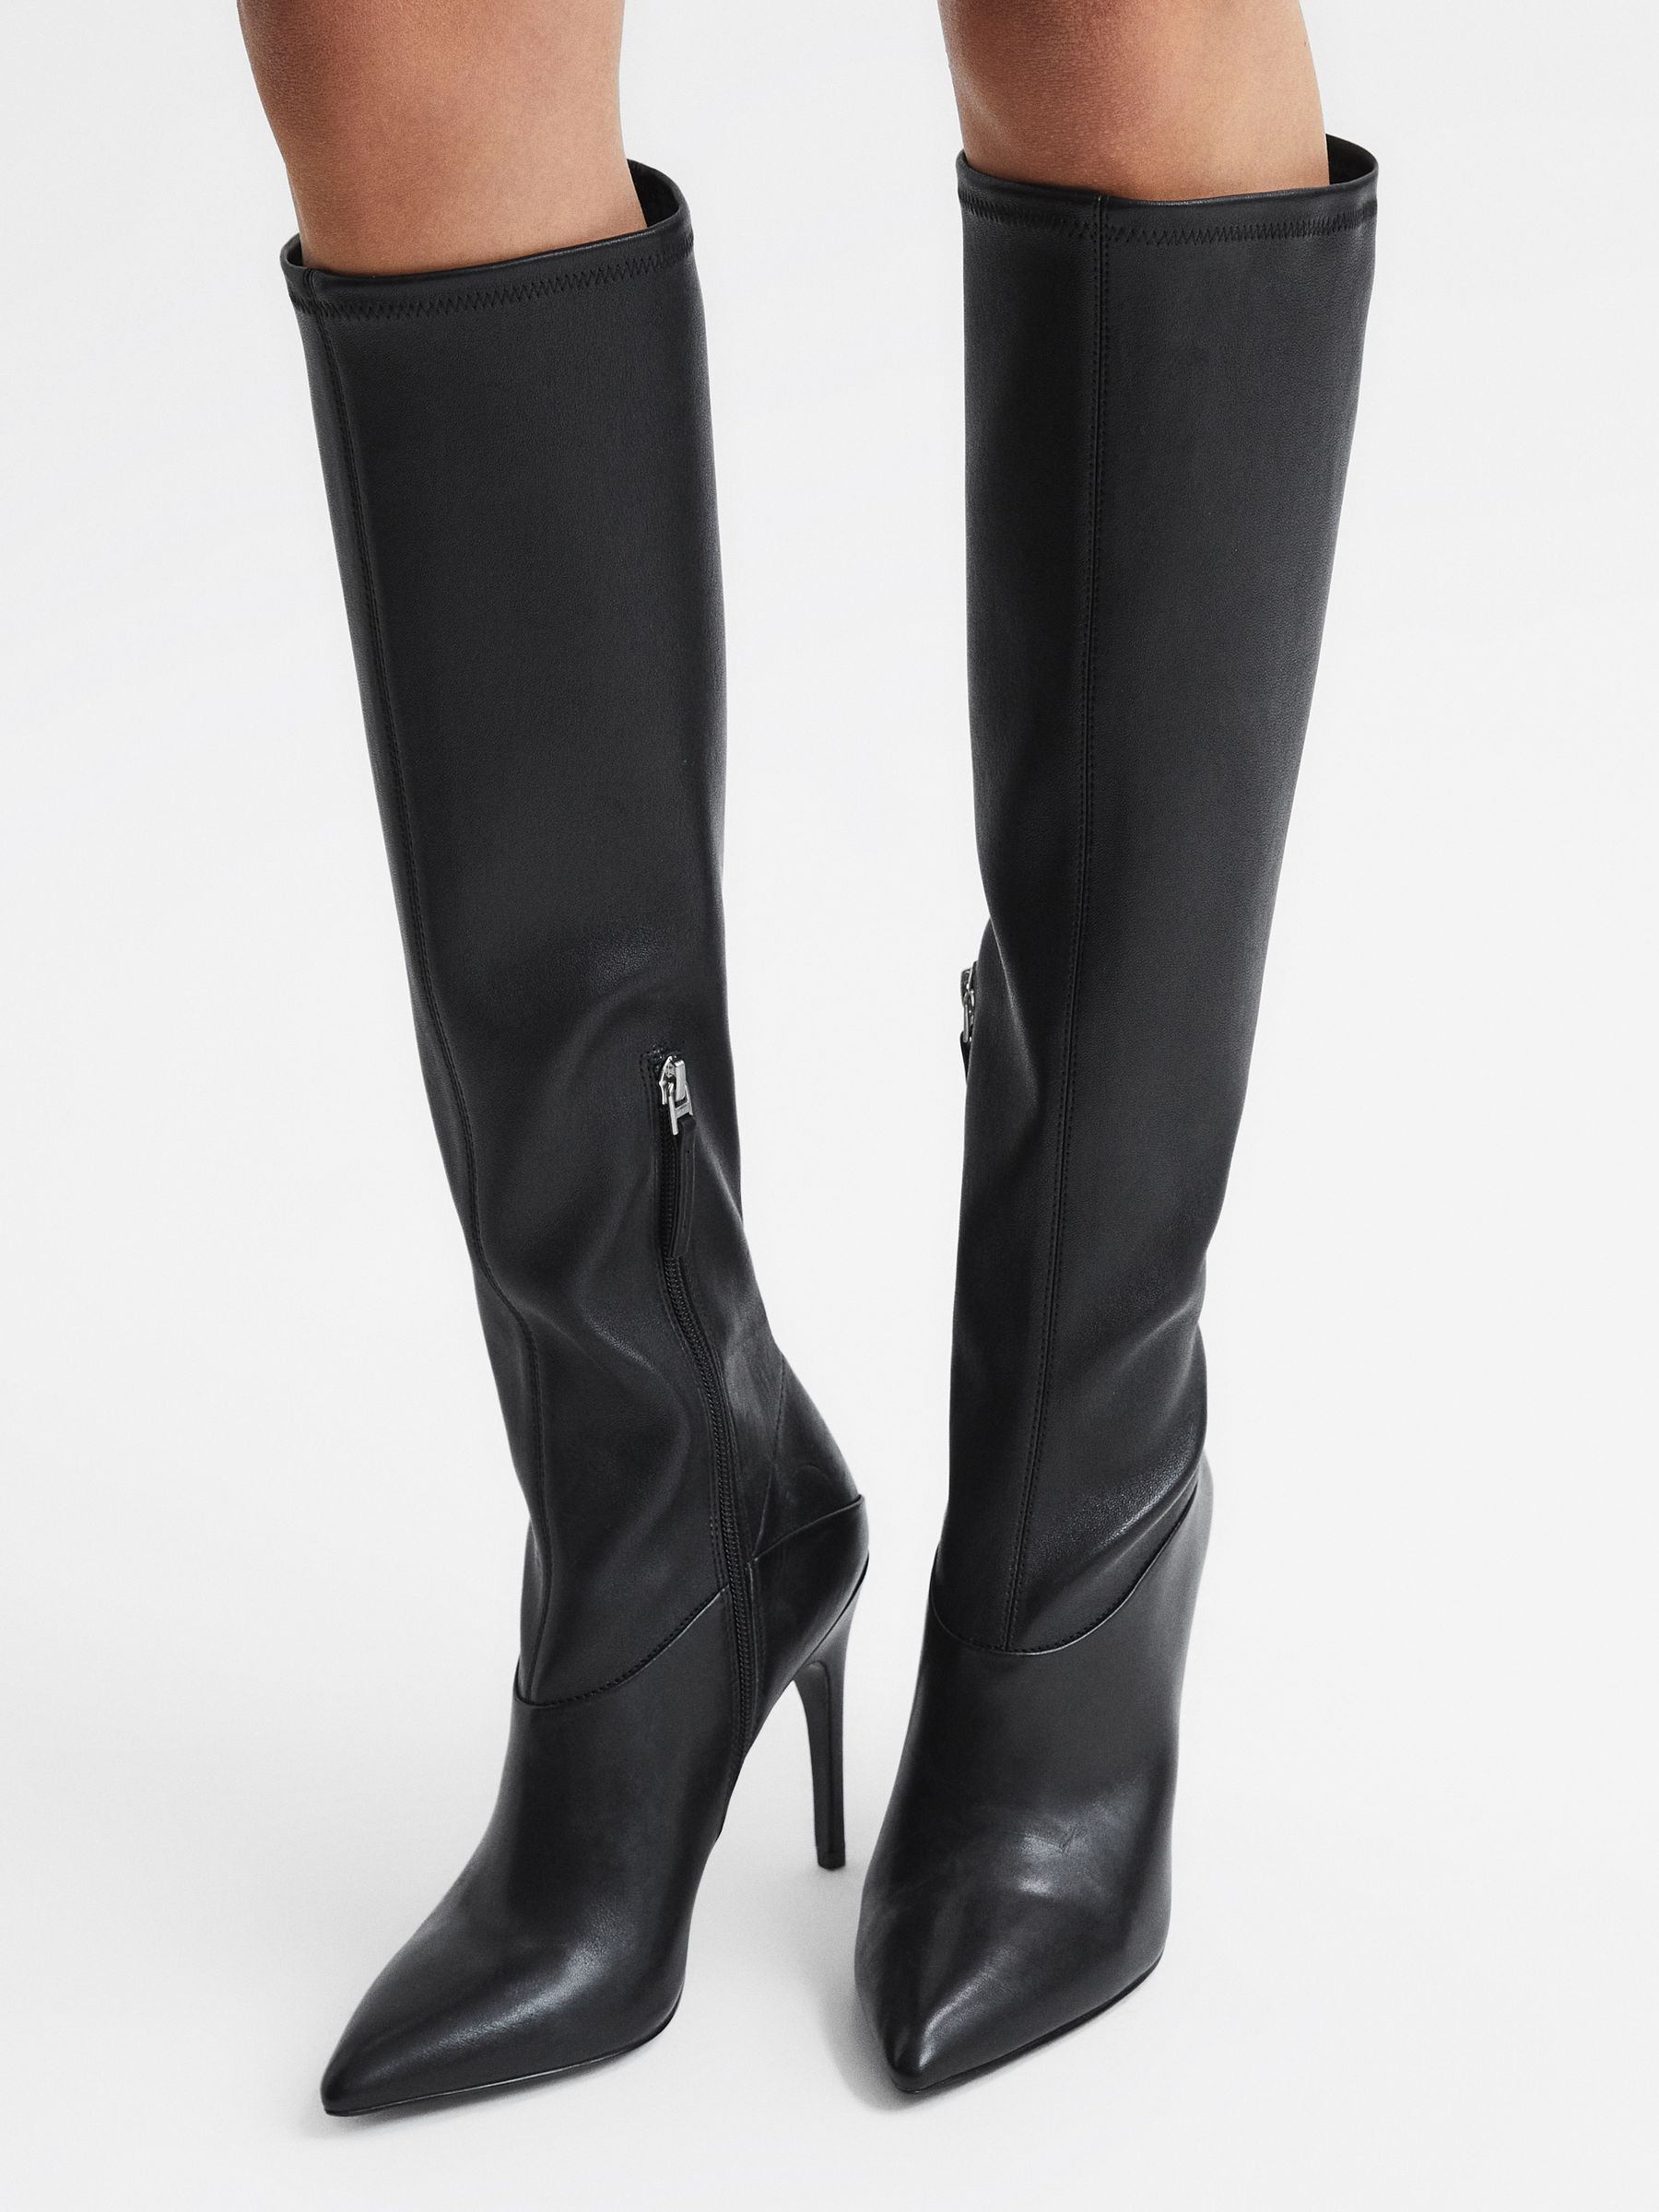 Reiss Carina Knee High Leather Boots - REISS